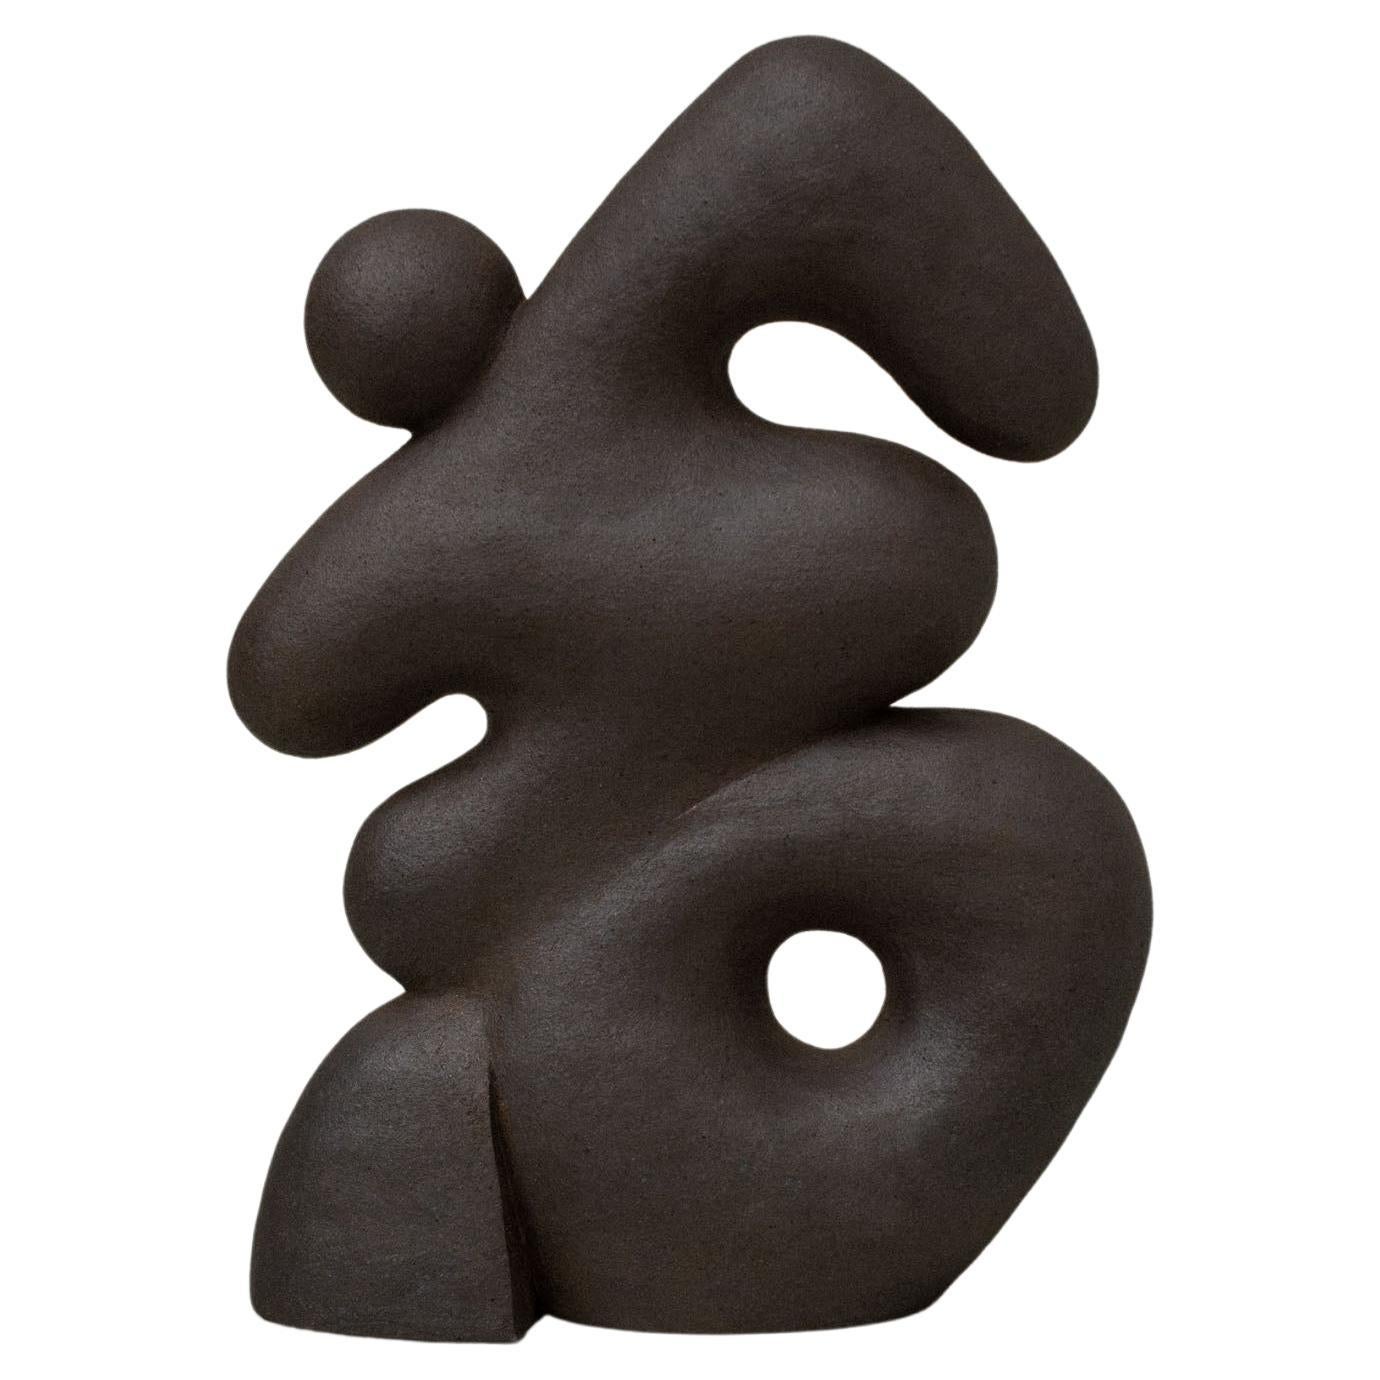 Dark Brown Hermes Sculpture by Common Body For Sale